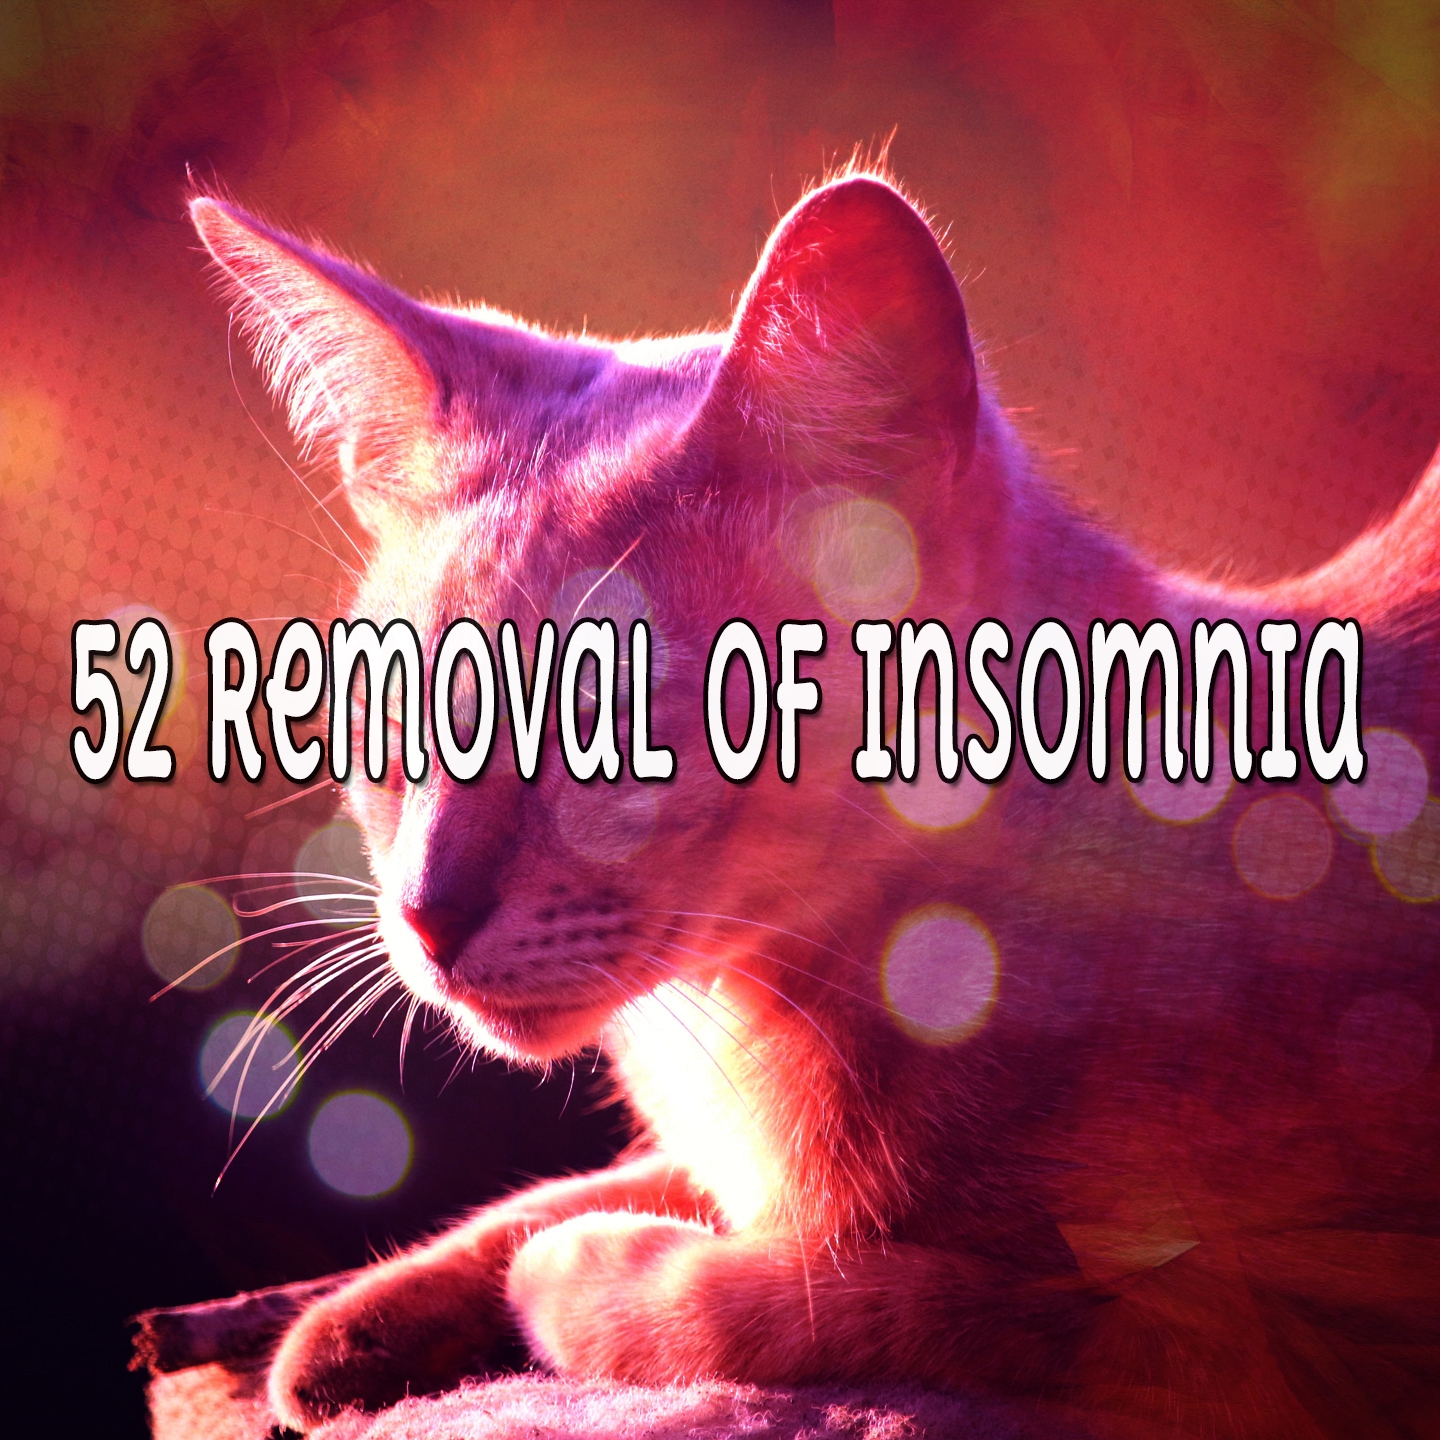 52 Removal Of Insomnia